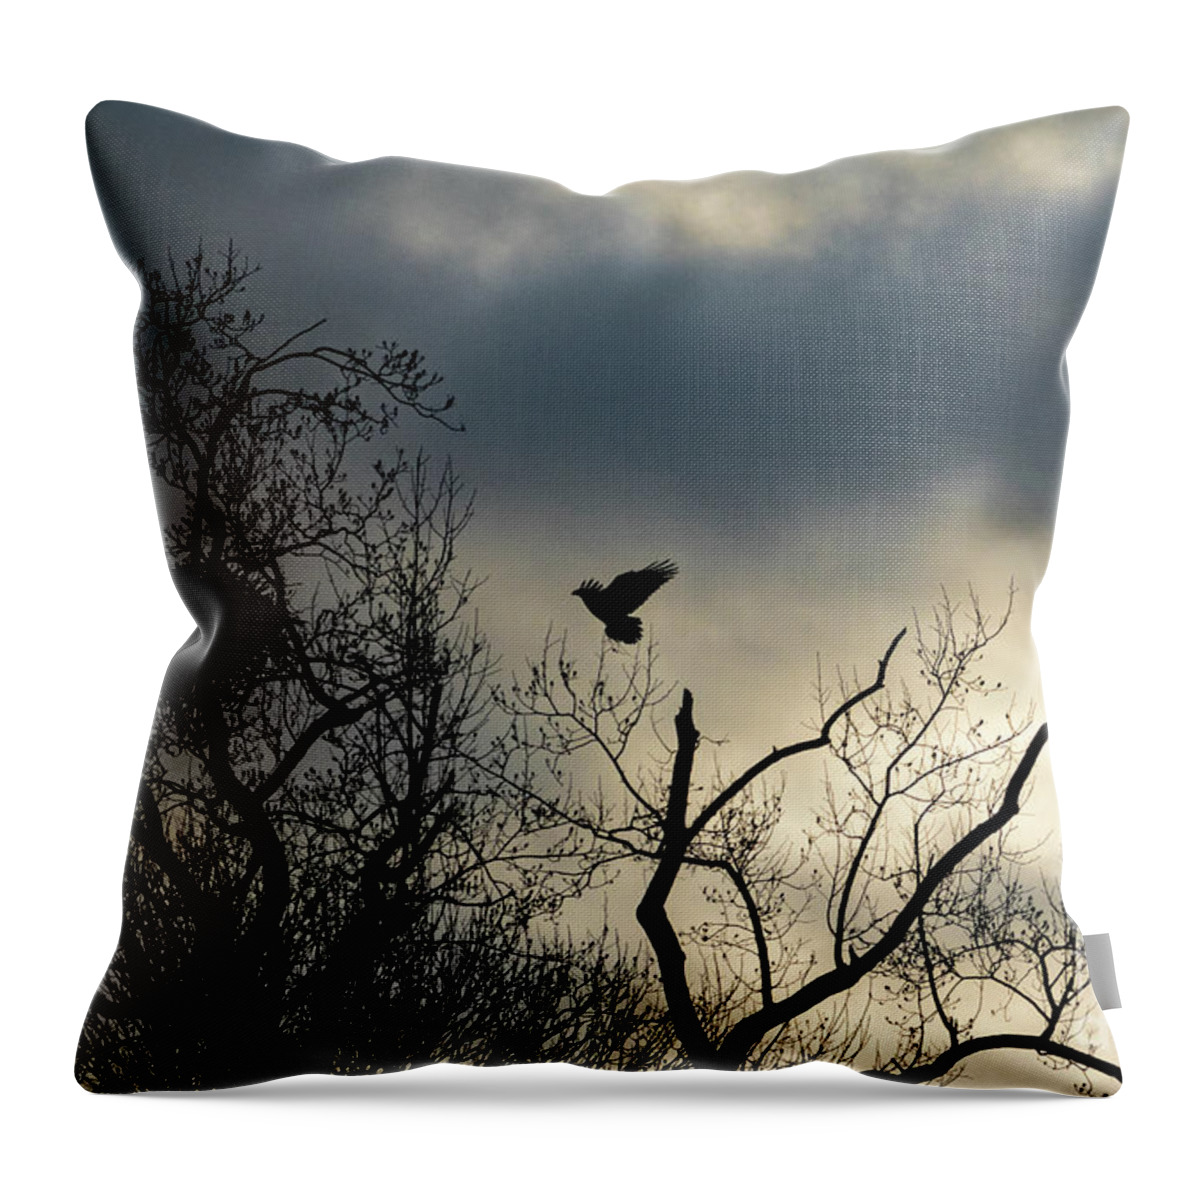 Eagle Throw Pillow featuring the photograph Home Before Dark by Alyssa Tumale